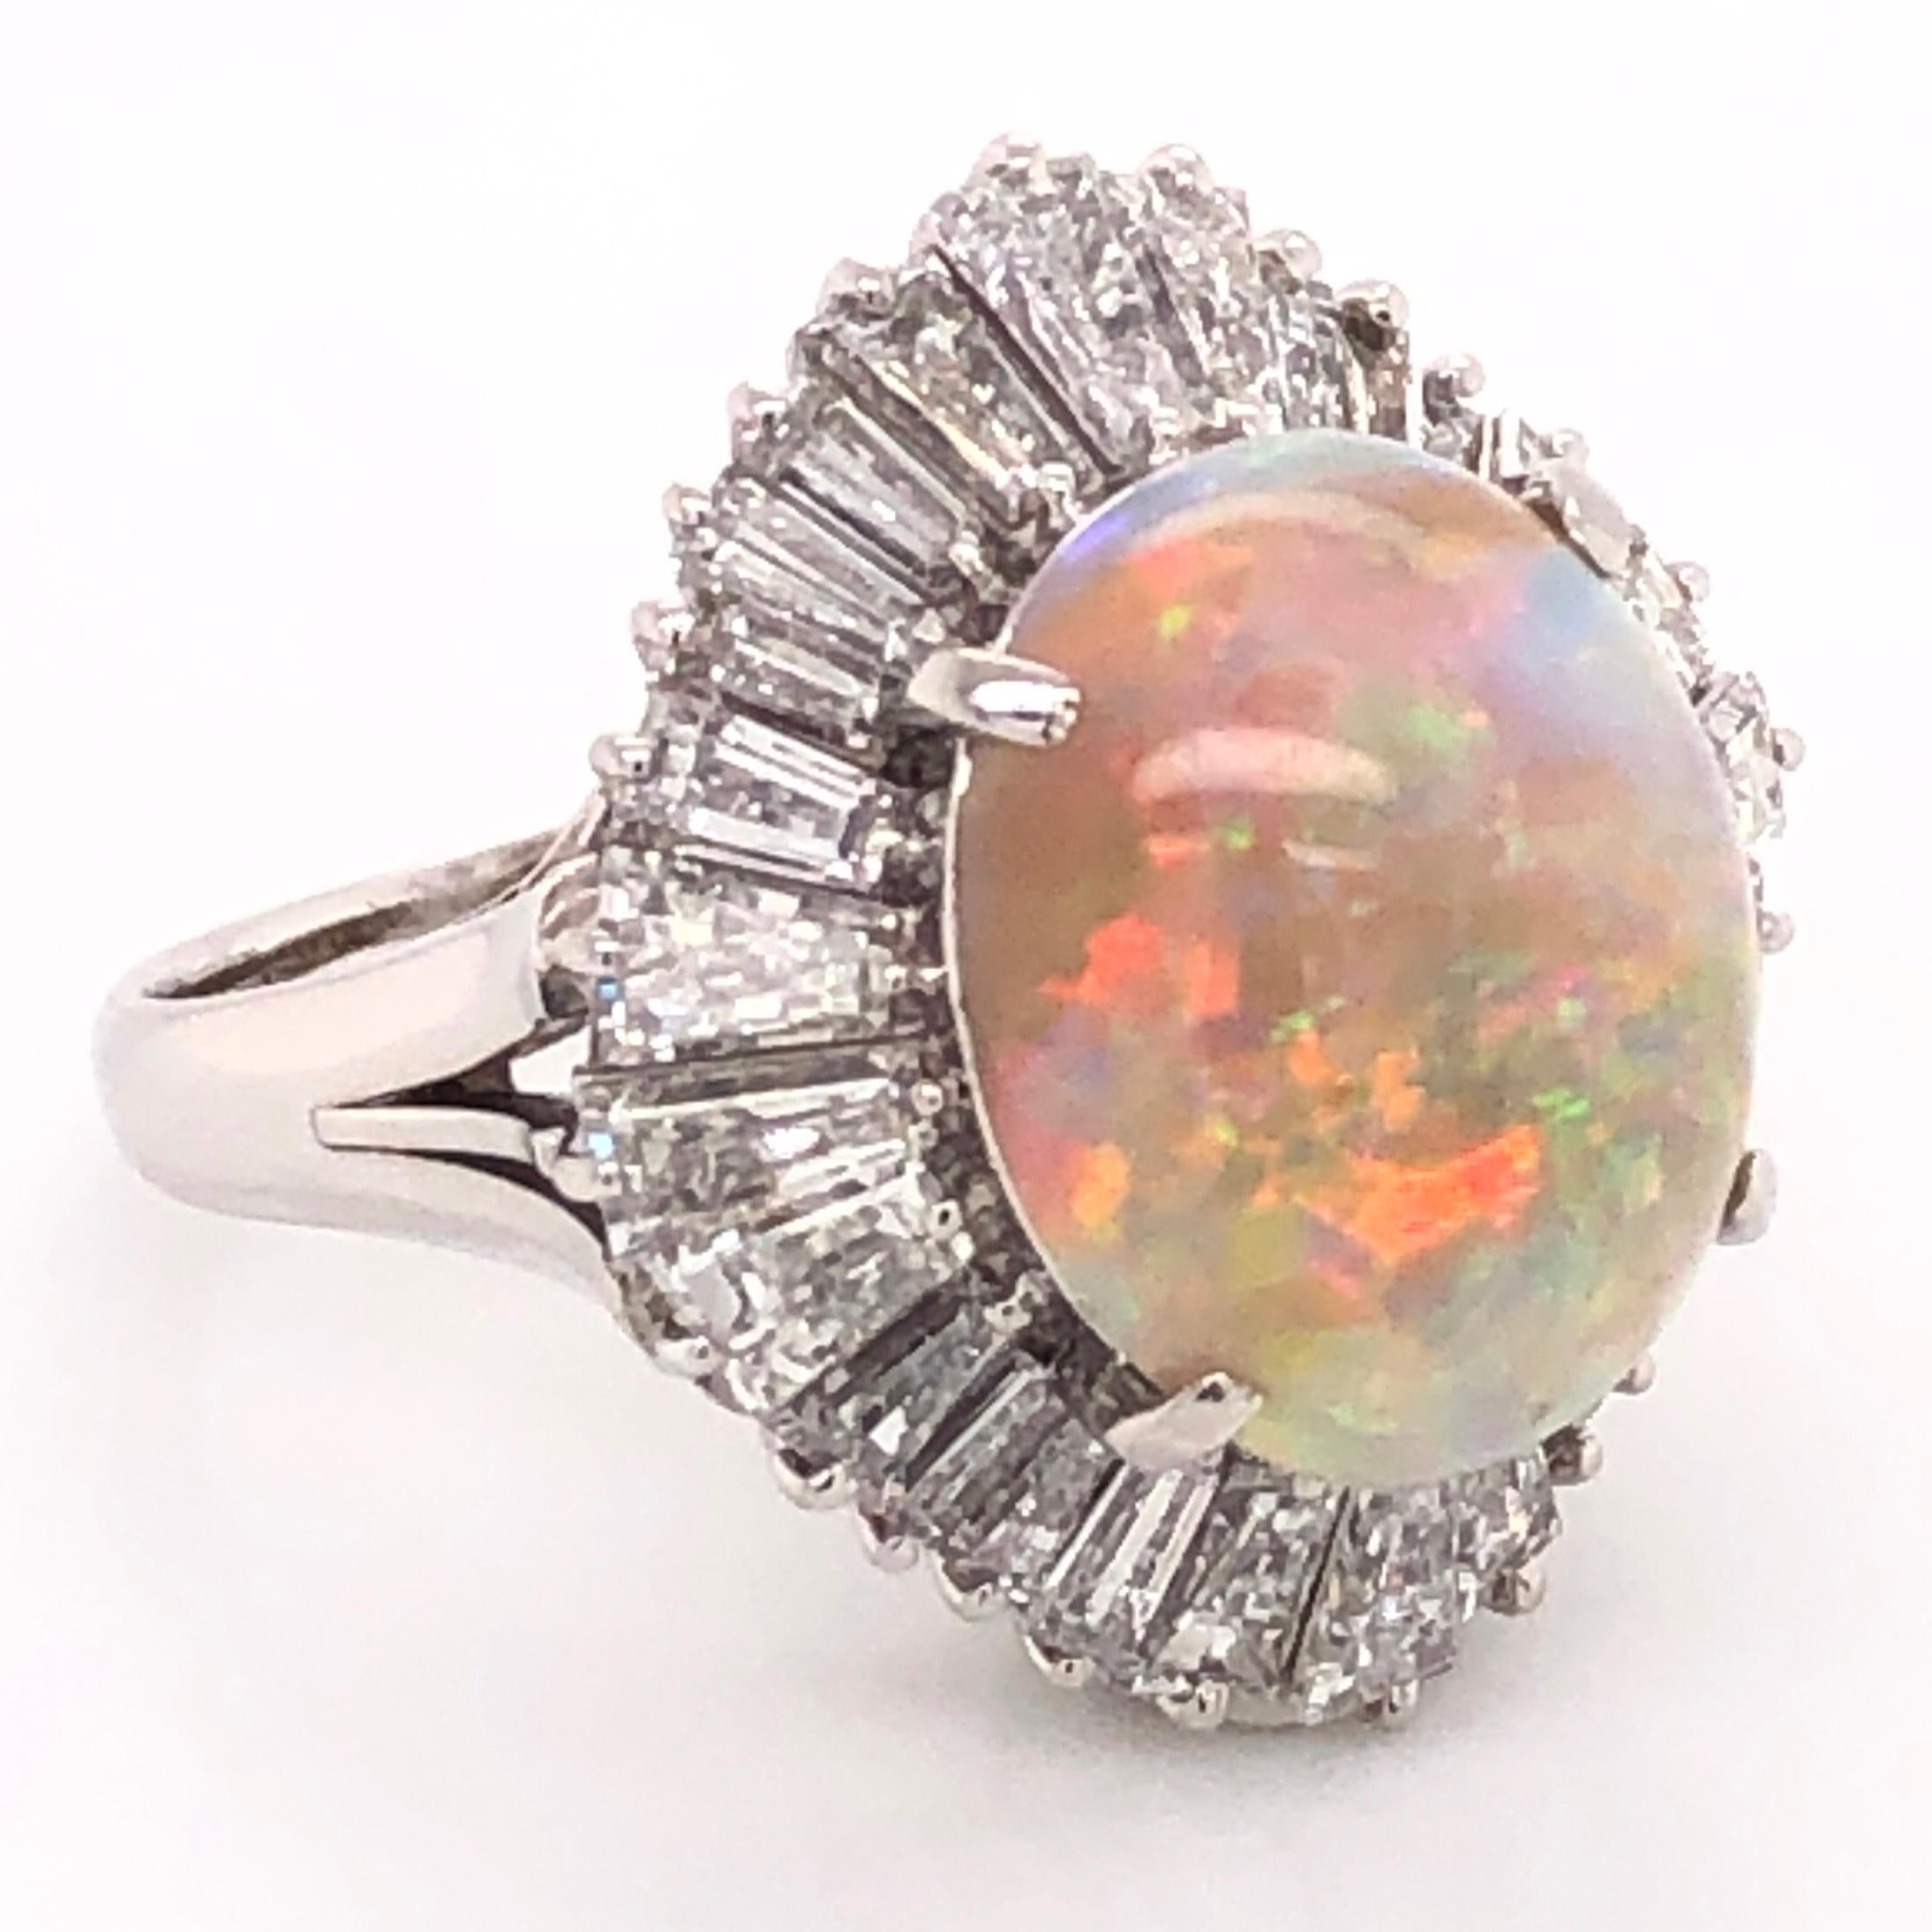 Simply Beautiful! Finely detailed Ballerina Vintage Platinum Cocktail Ring. Centering a securely nestled Hand set Australian White Opal, weighing 5.82 Carats, surrounded by Diamonds, approx. 2.81tcw. Hand crafted Platinum mounting. Size 6, we offer